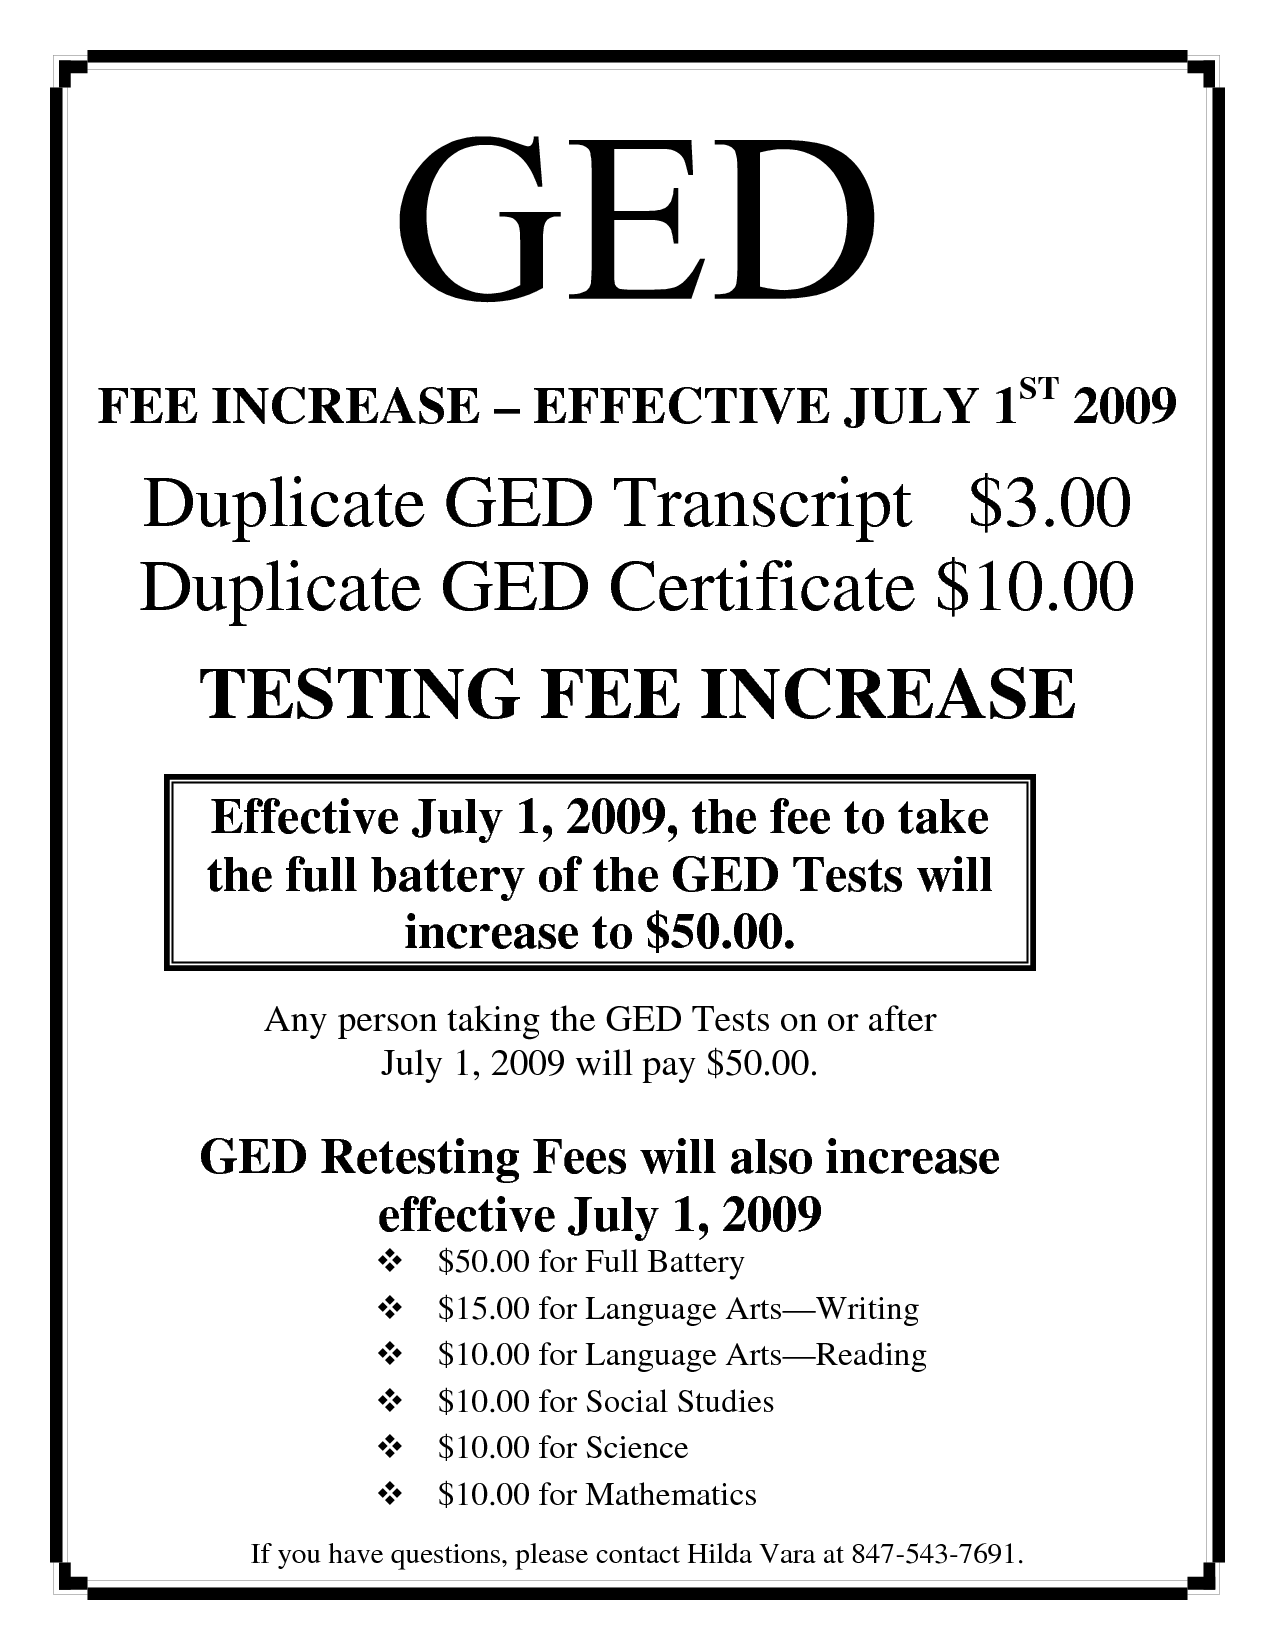 Free Copy of GED Certificate | The SCALE Program in Somerville 